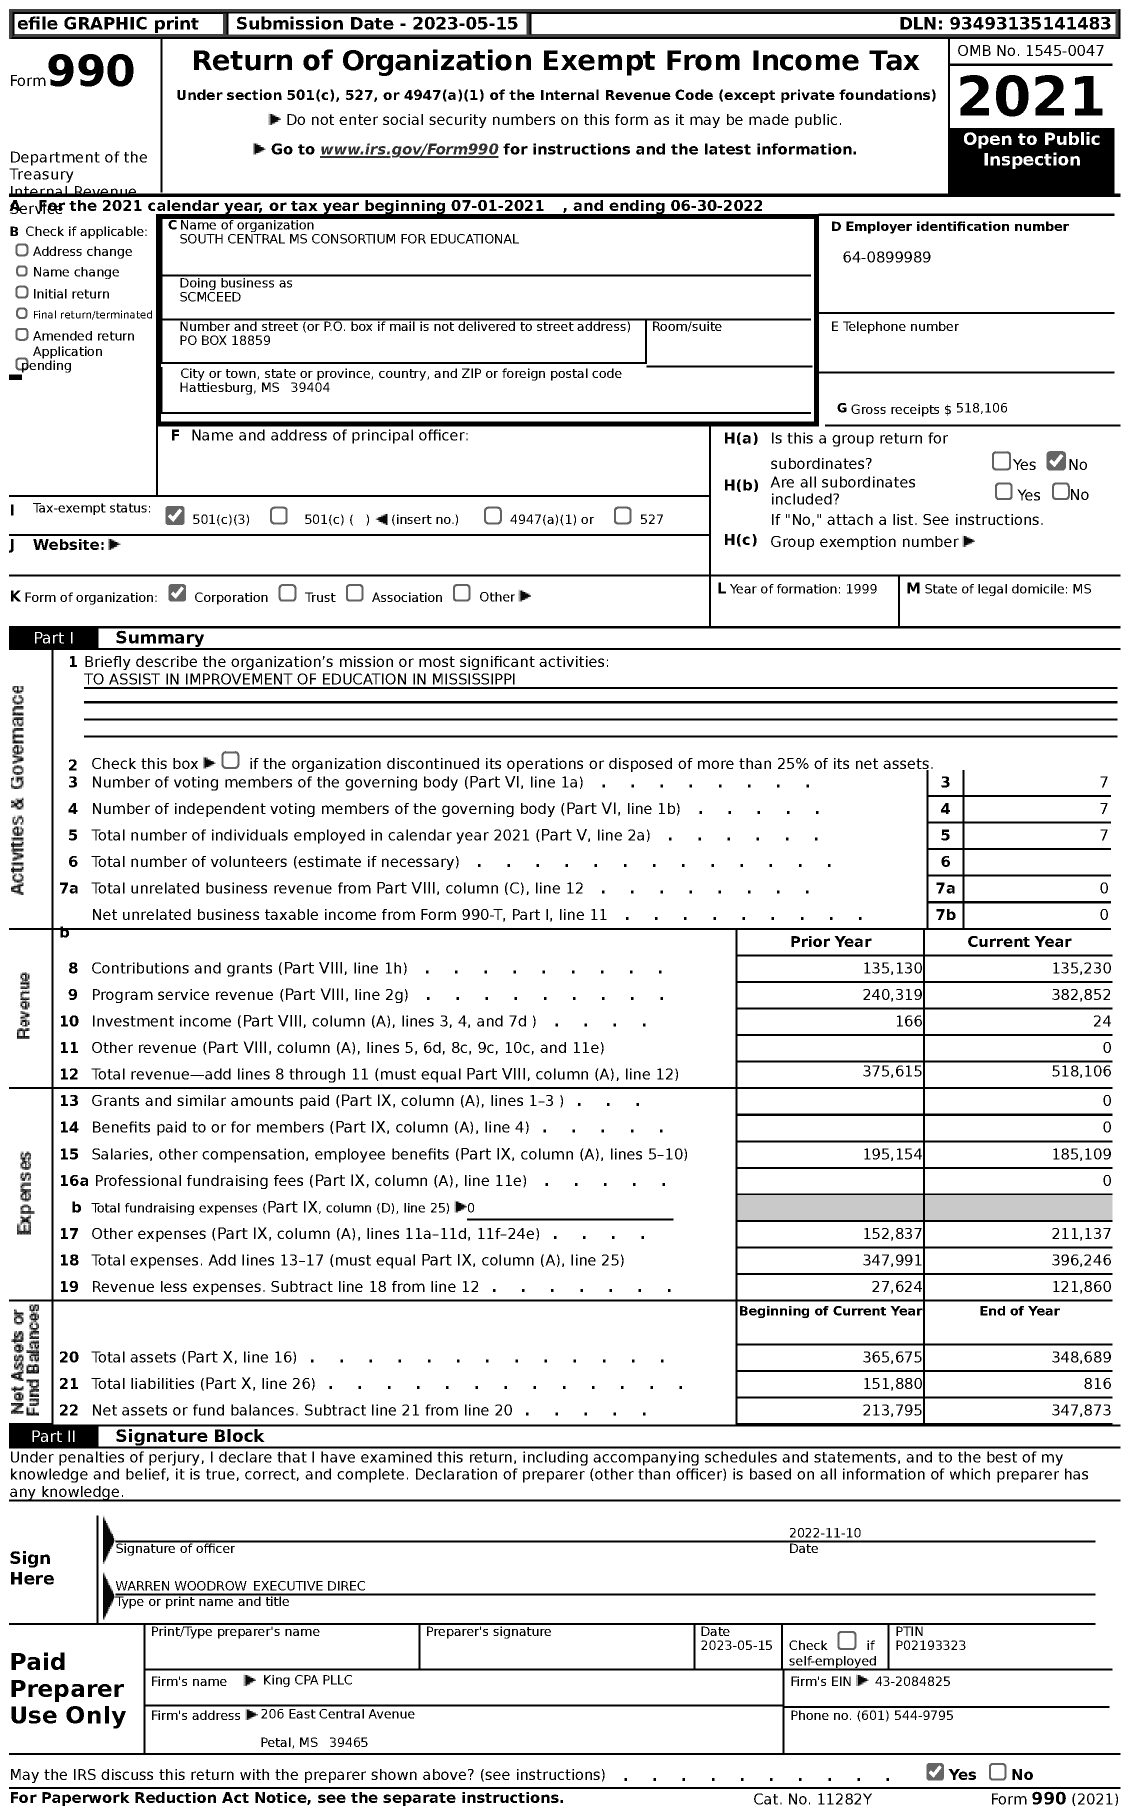 Image of first page of 2021 Form 990 for South Central Mississippi Cons for Educational Excellence and DVLPMT (SCMCEED)